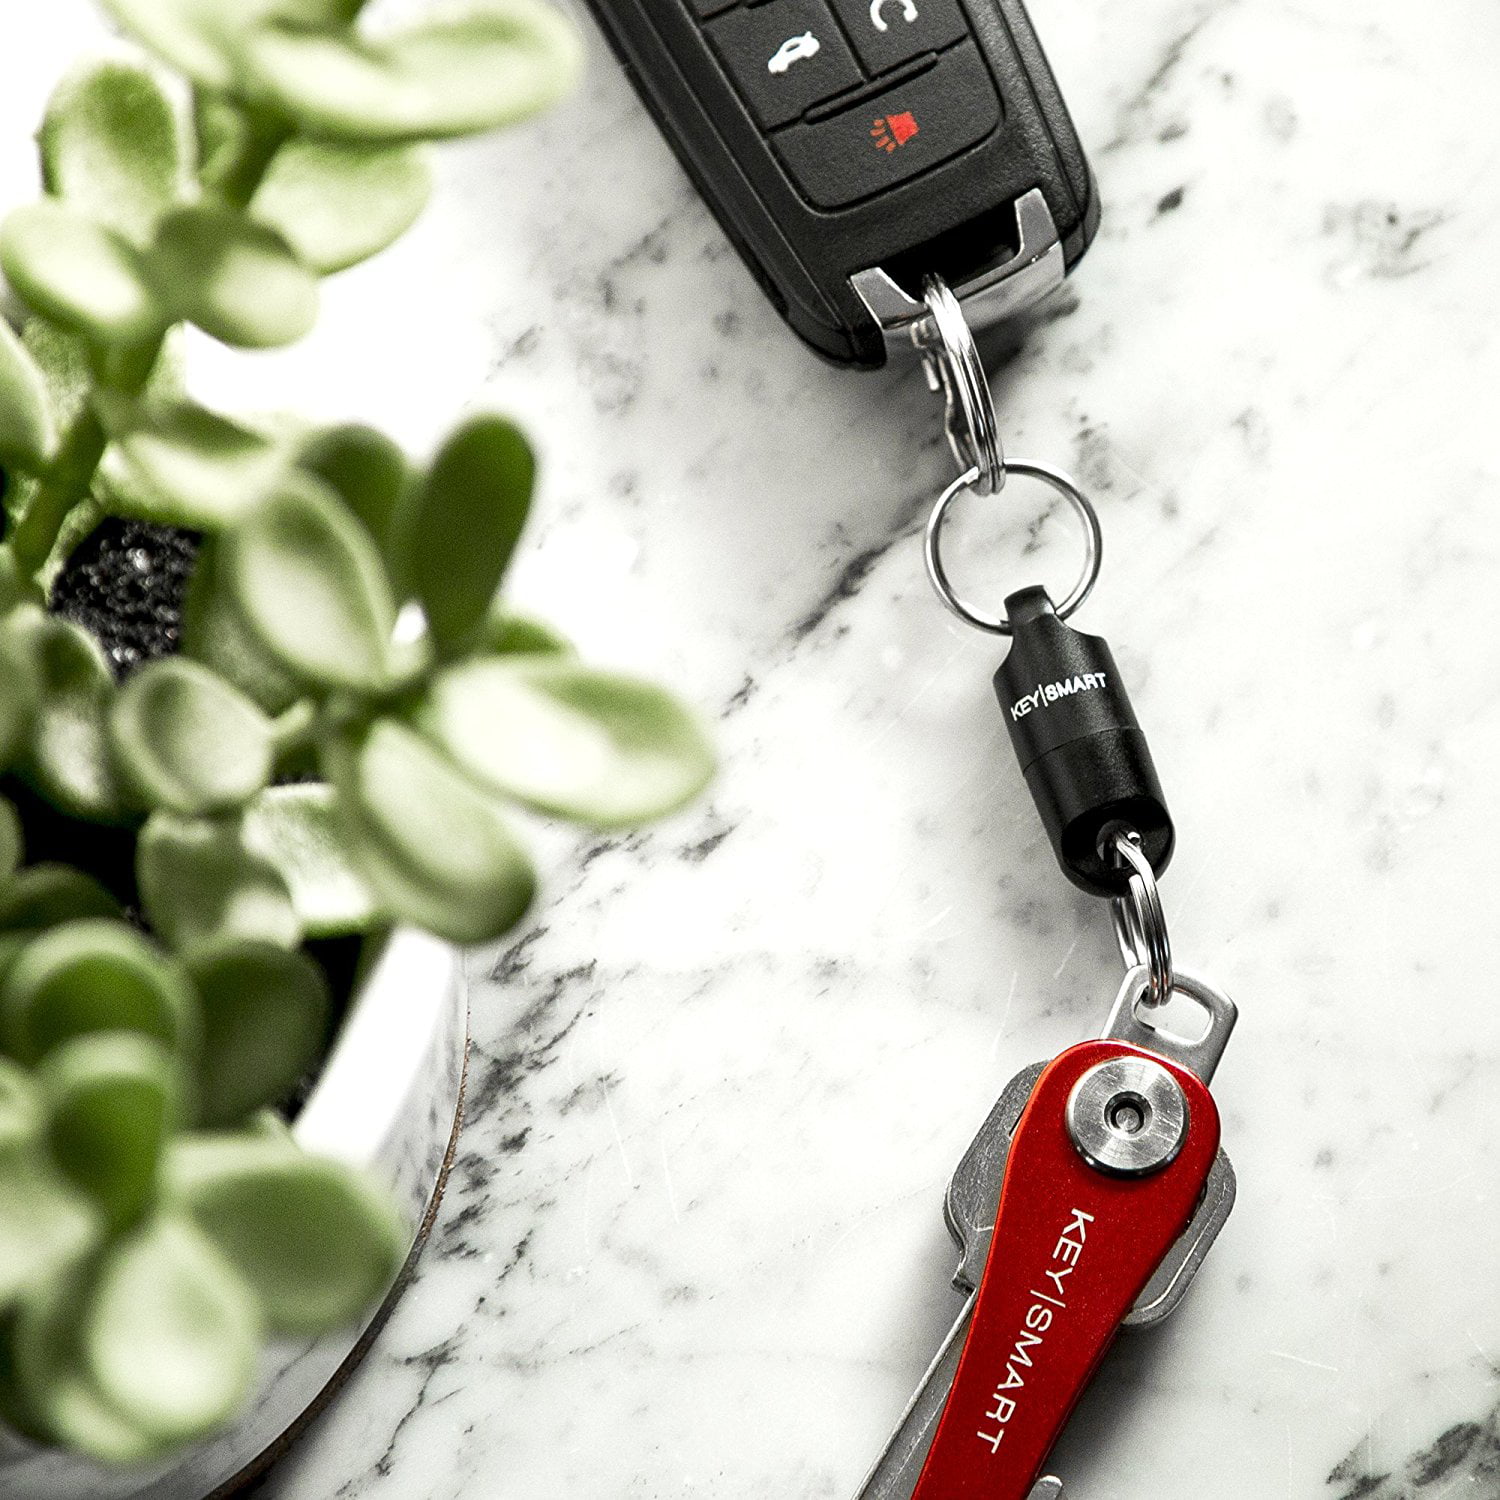 KeySmart MagConnect Pro Magnetic Quick Connect at Swiss Knife Shop